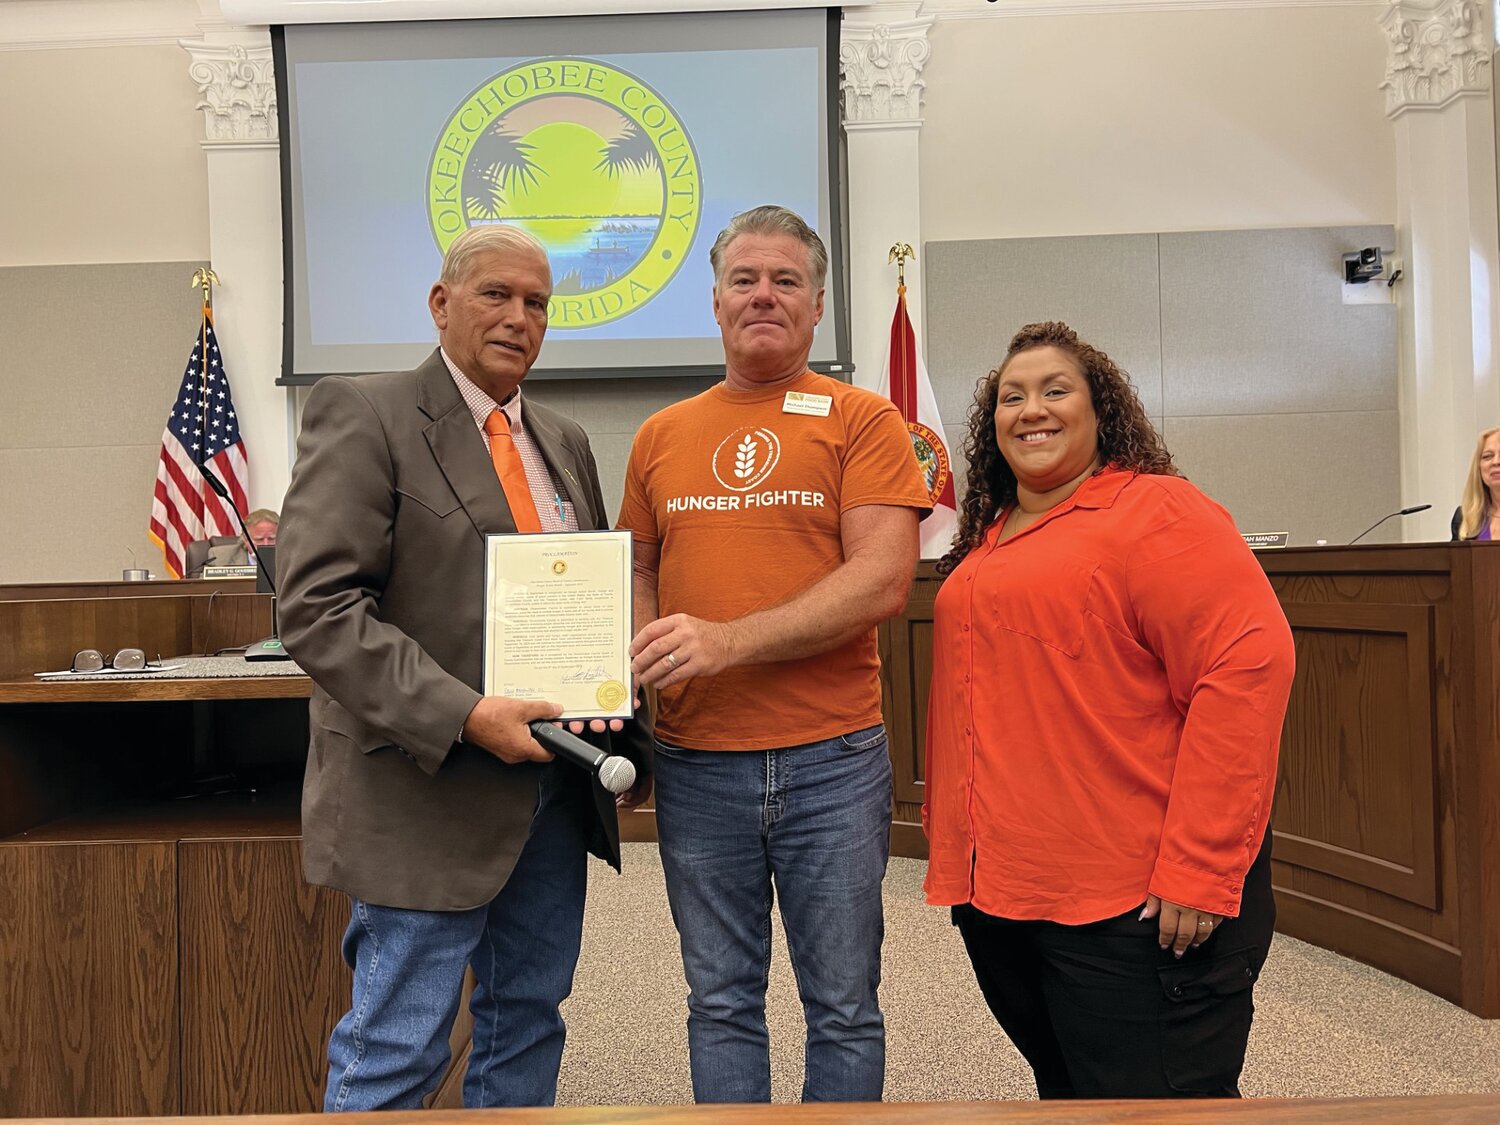 OKEECHOBEE – September is Hunger Action Month in Okeechobee County. At the Sept. 6 meeting, (left to right) Okeechobee County Commission Chairman David Hazellief (left) presented a proclamation to Michael Thompson, Food Procurement Manager for the Treasure Coast Food Bank and Andrea Santos, Retail Store Donation Coordinator. [Photo by Katrina Elsken/Lake Okeechobee News]